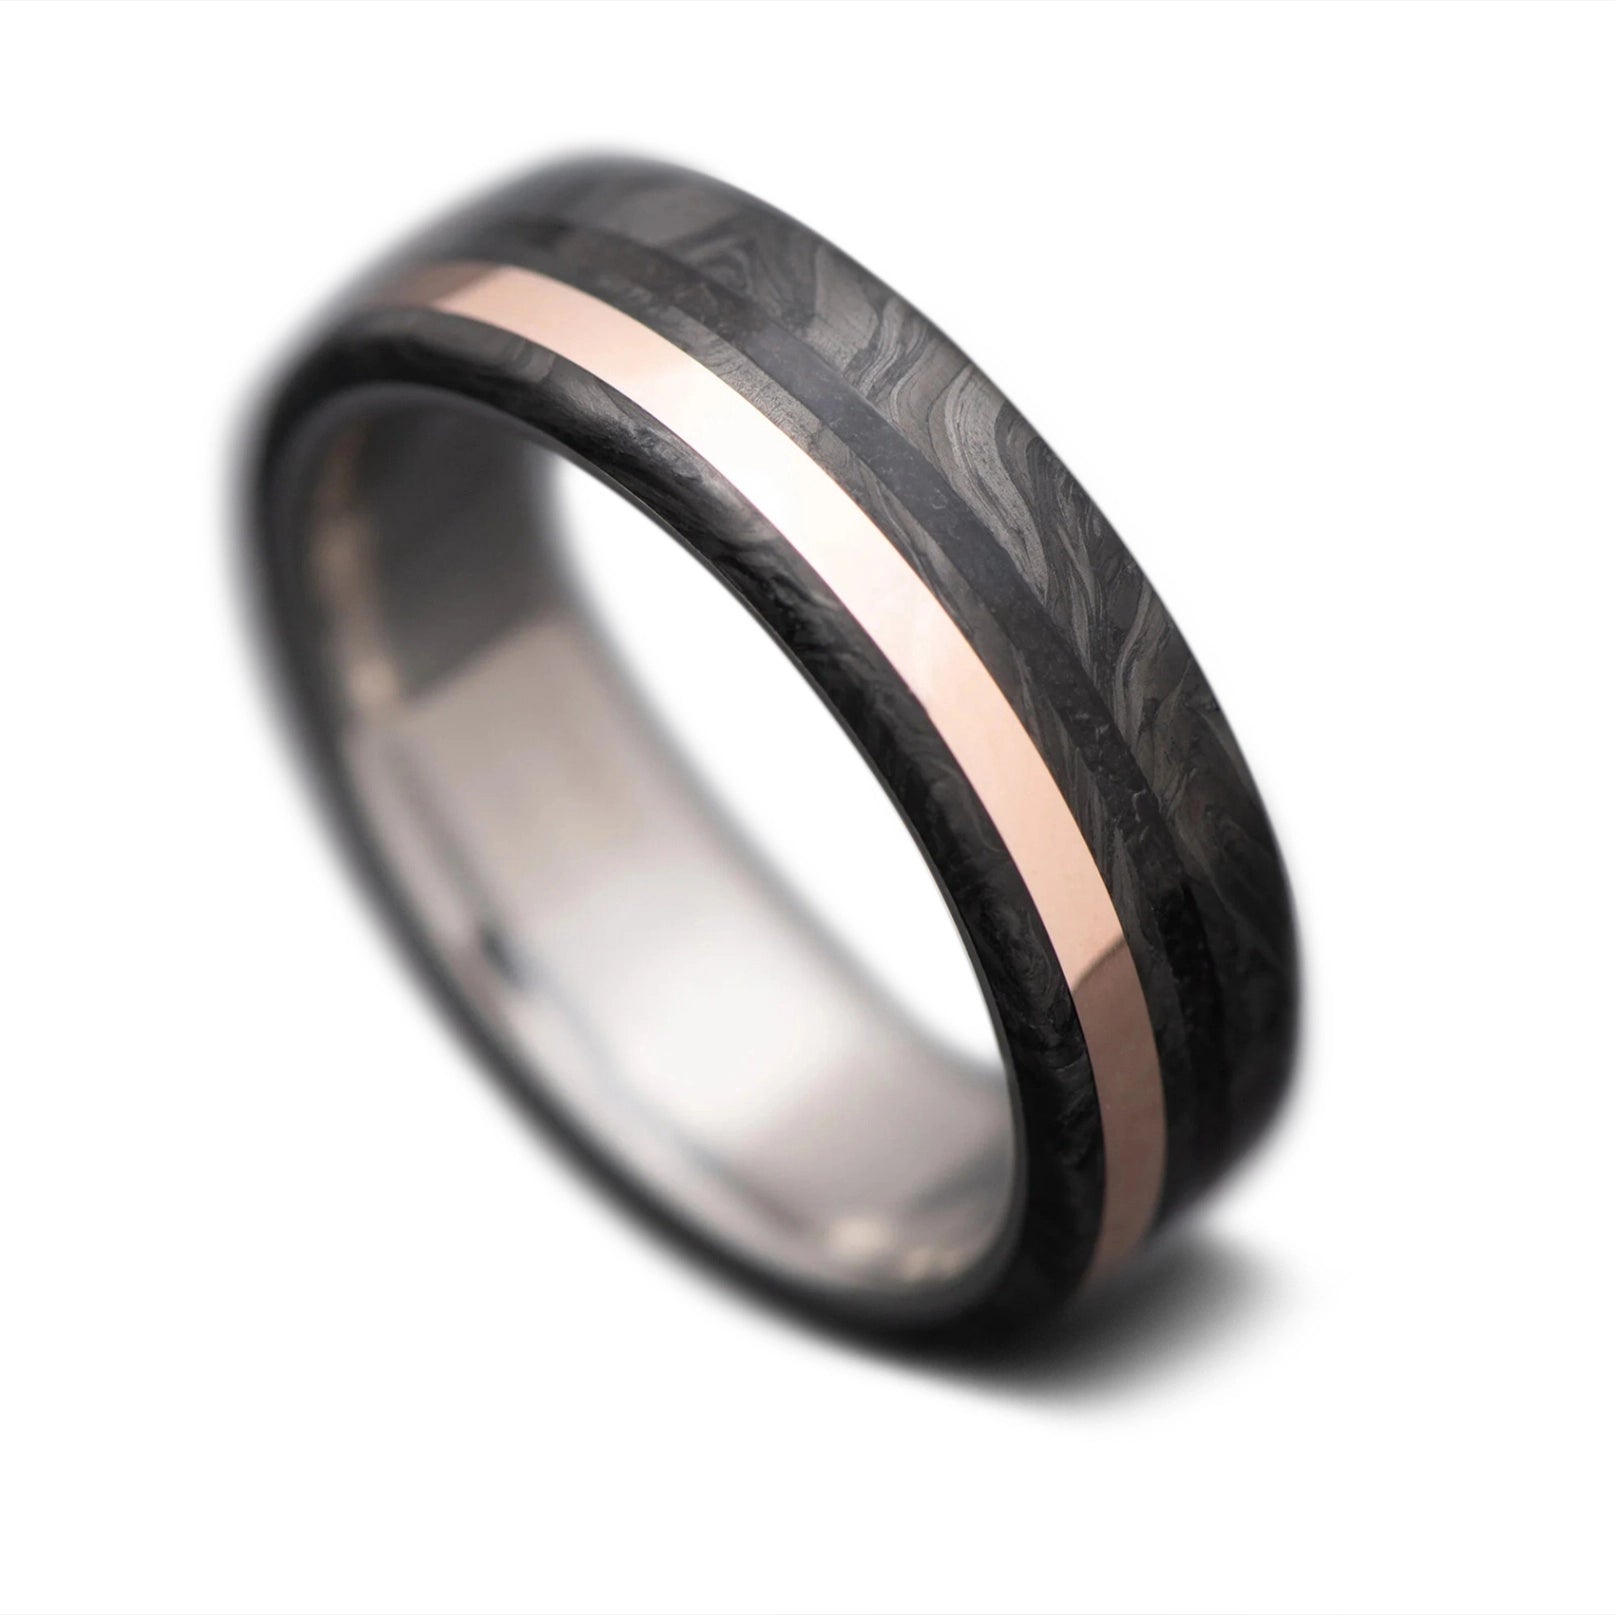 ForgedCarbon Ring with 14K Gold and BlackOnyx Inlay Men's Wedding Band